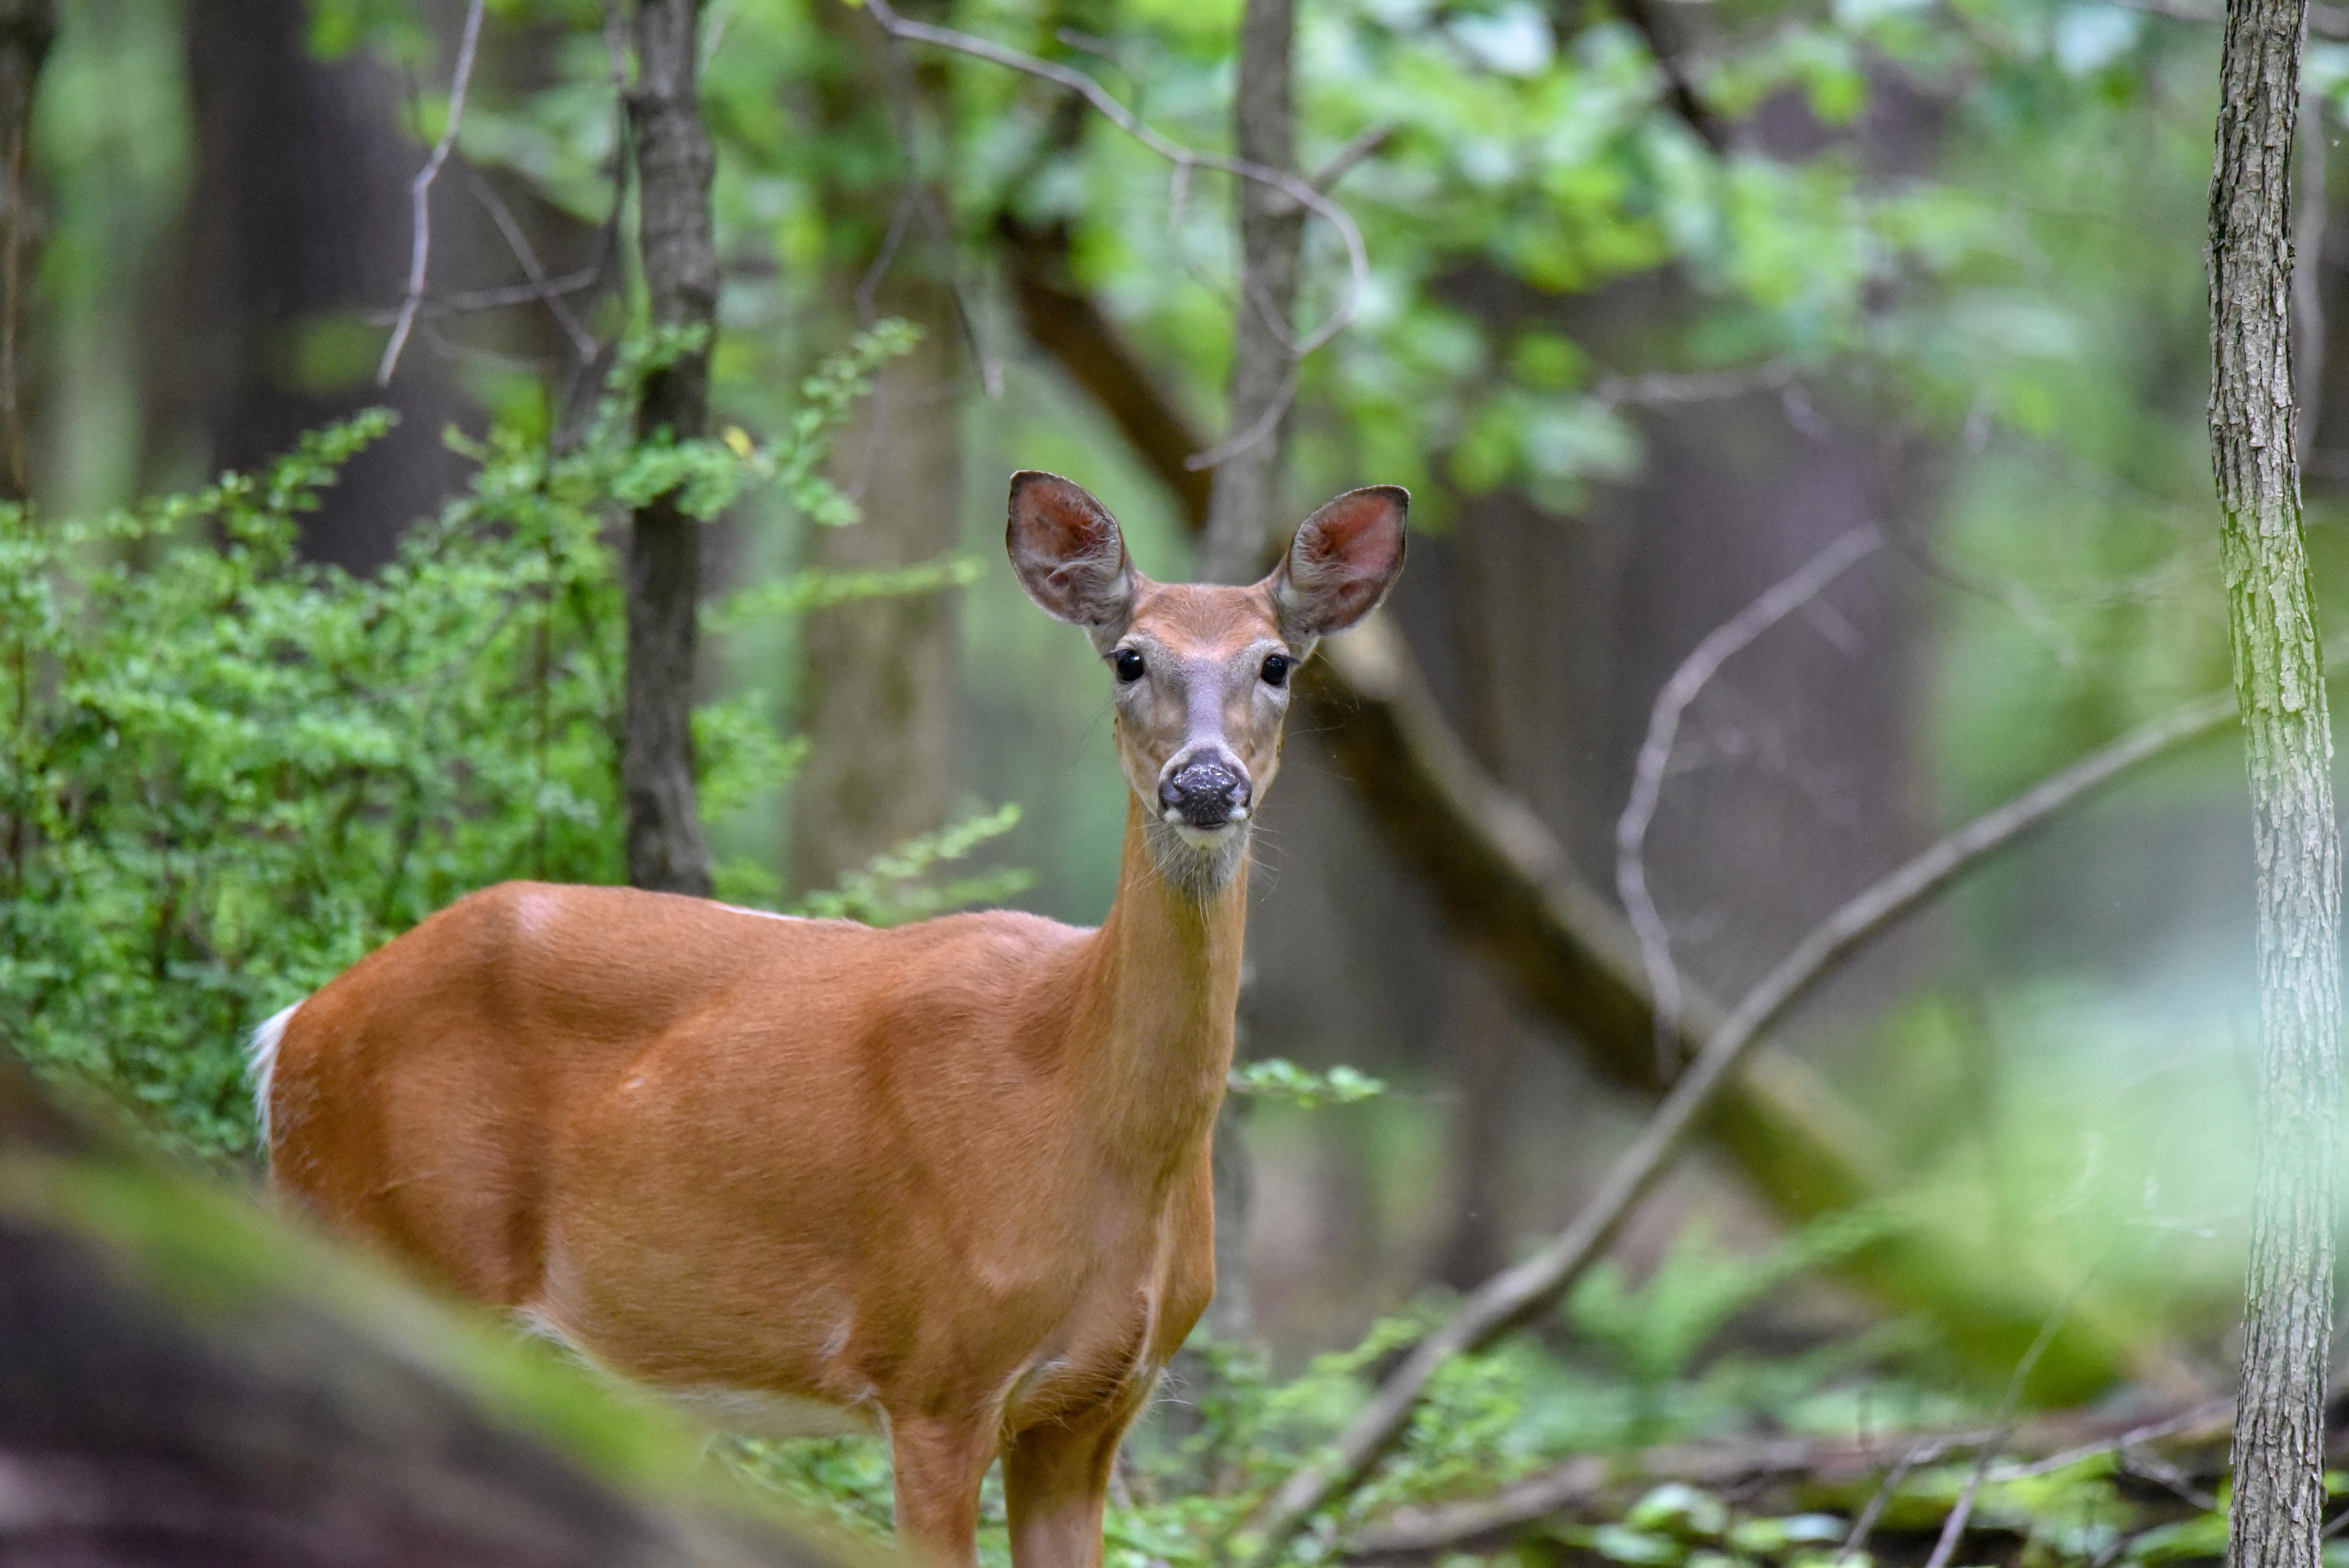 A deer in the woods looking at the camera.